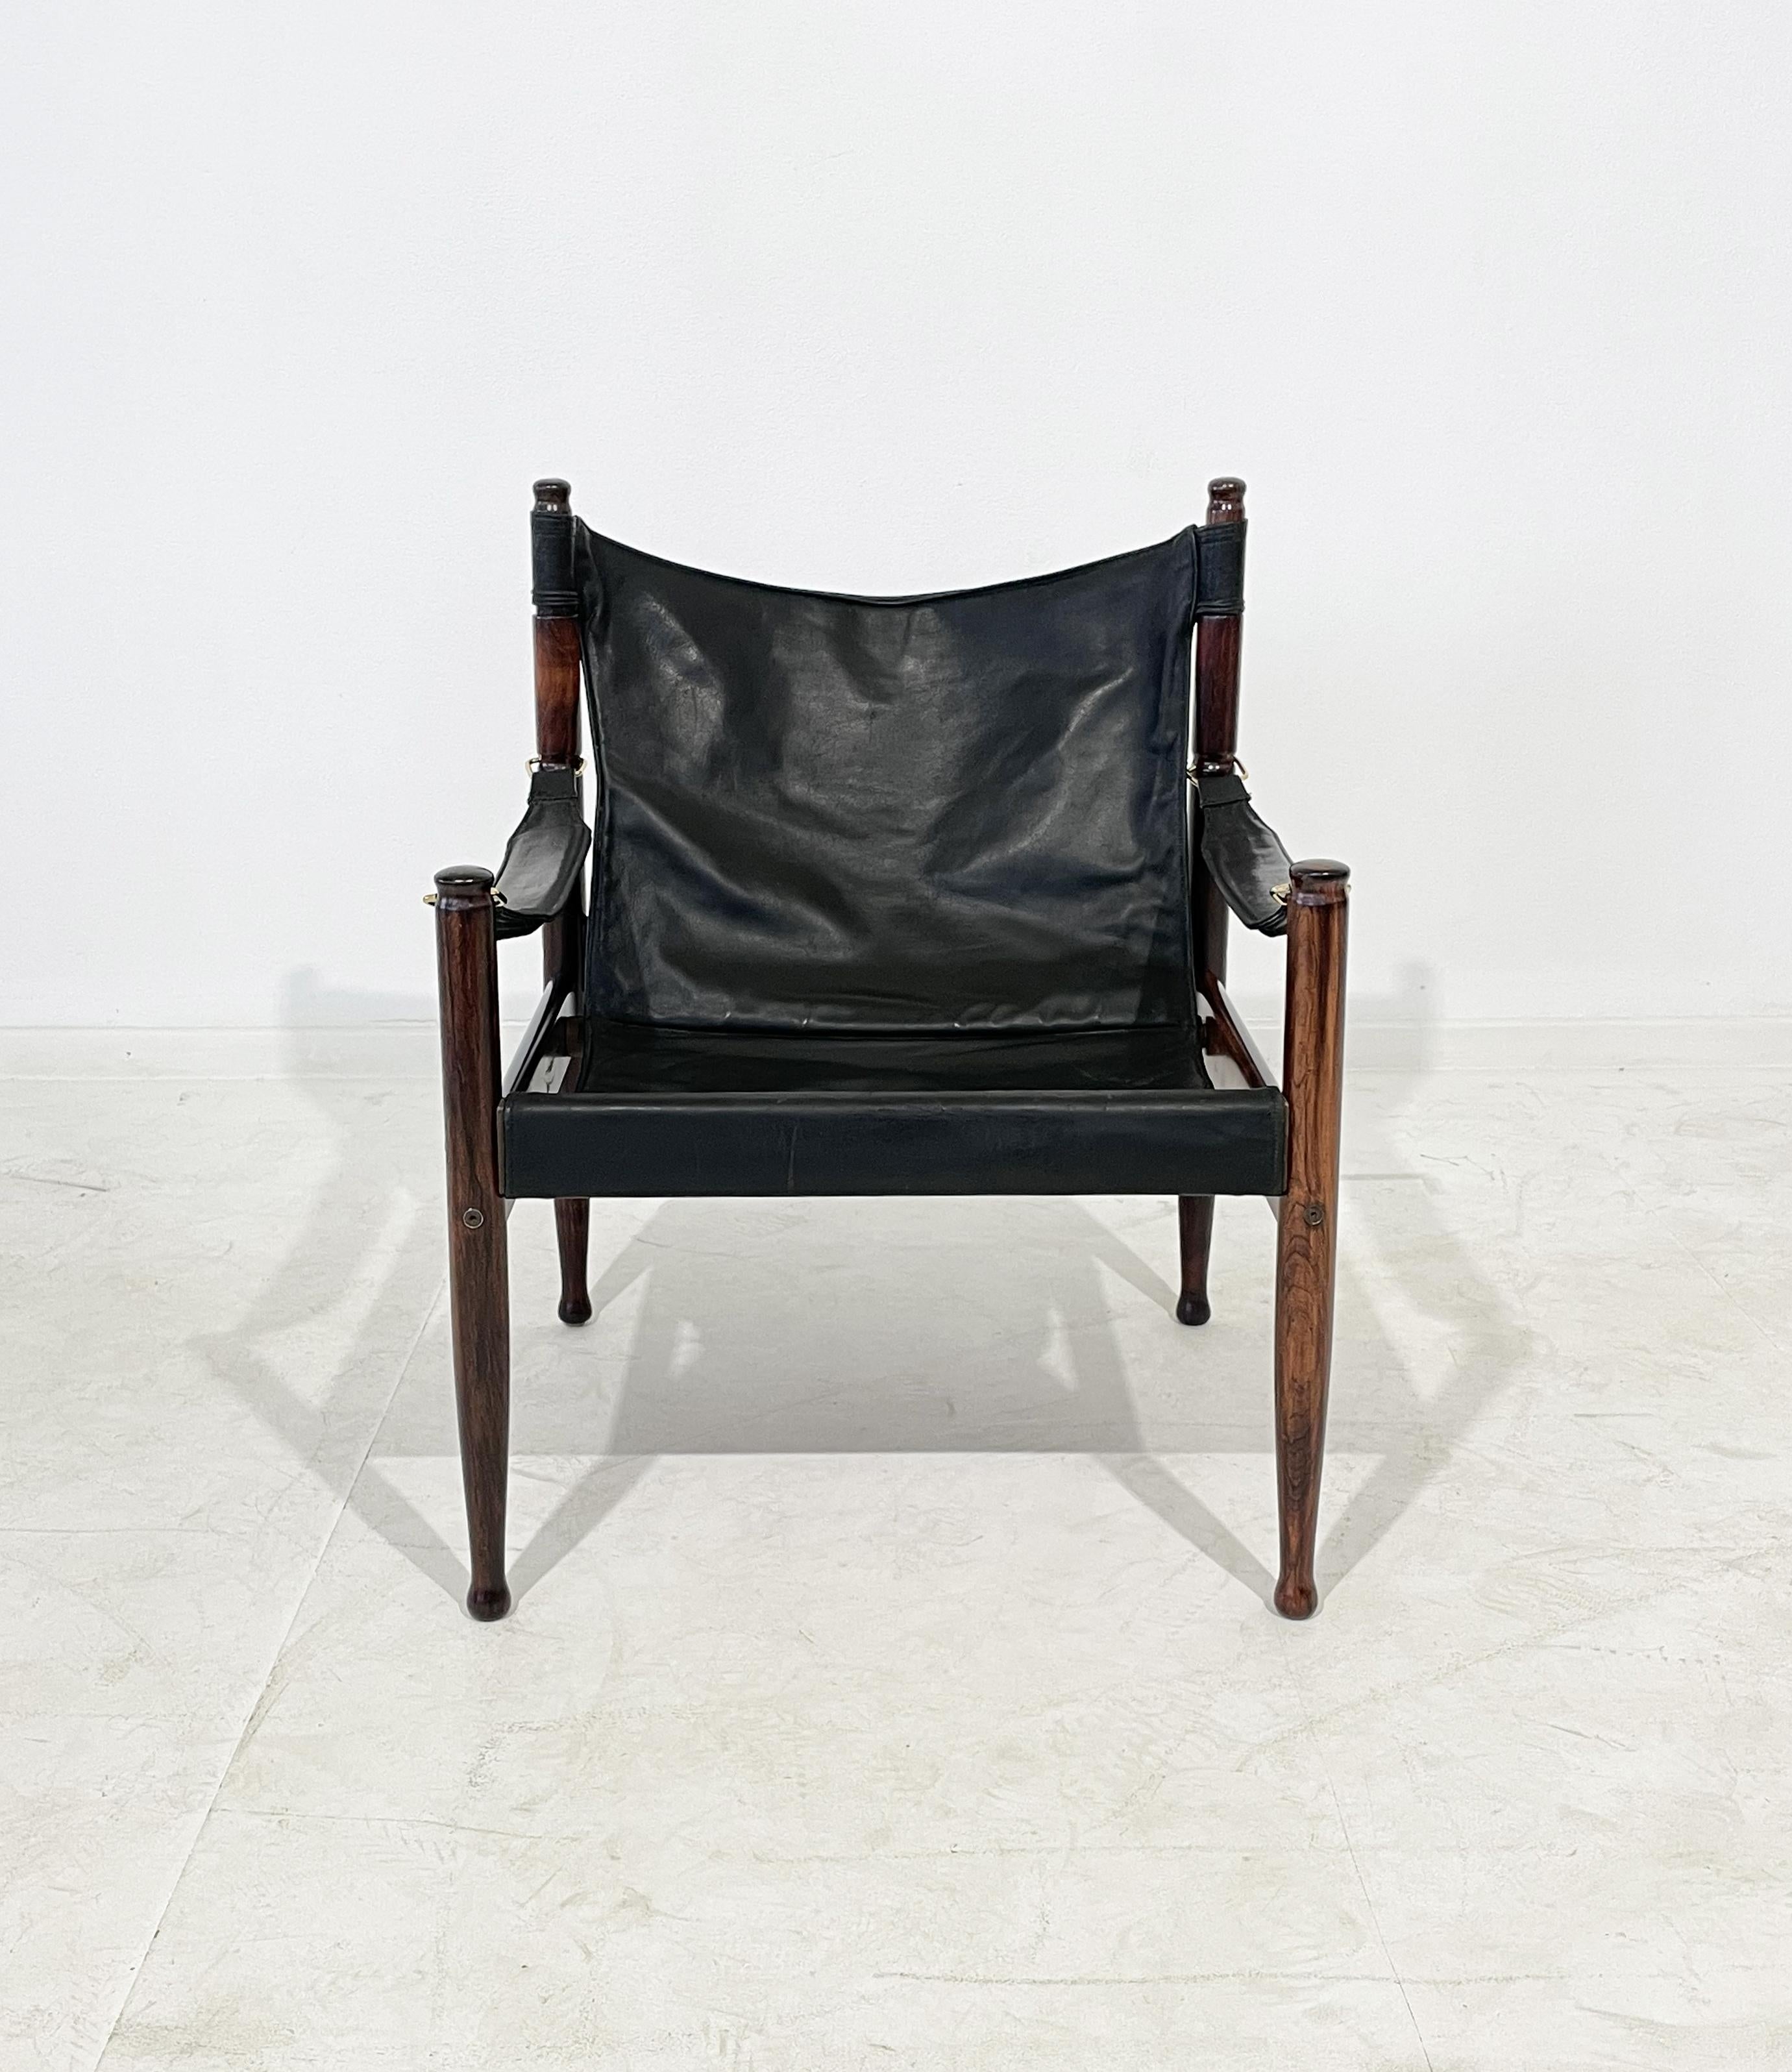 Lounge chair
Designer: Erik Wørts
Production: Niels Eilersen
Origin: Denmark
Period: 1960s
Material: rosewood and leather
Color: black
Dimensions: 76 cm hight x 60 cm width x 60 cm depth
Good overall condition. Some marks on the leather.